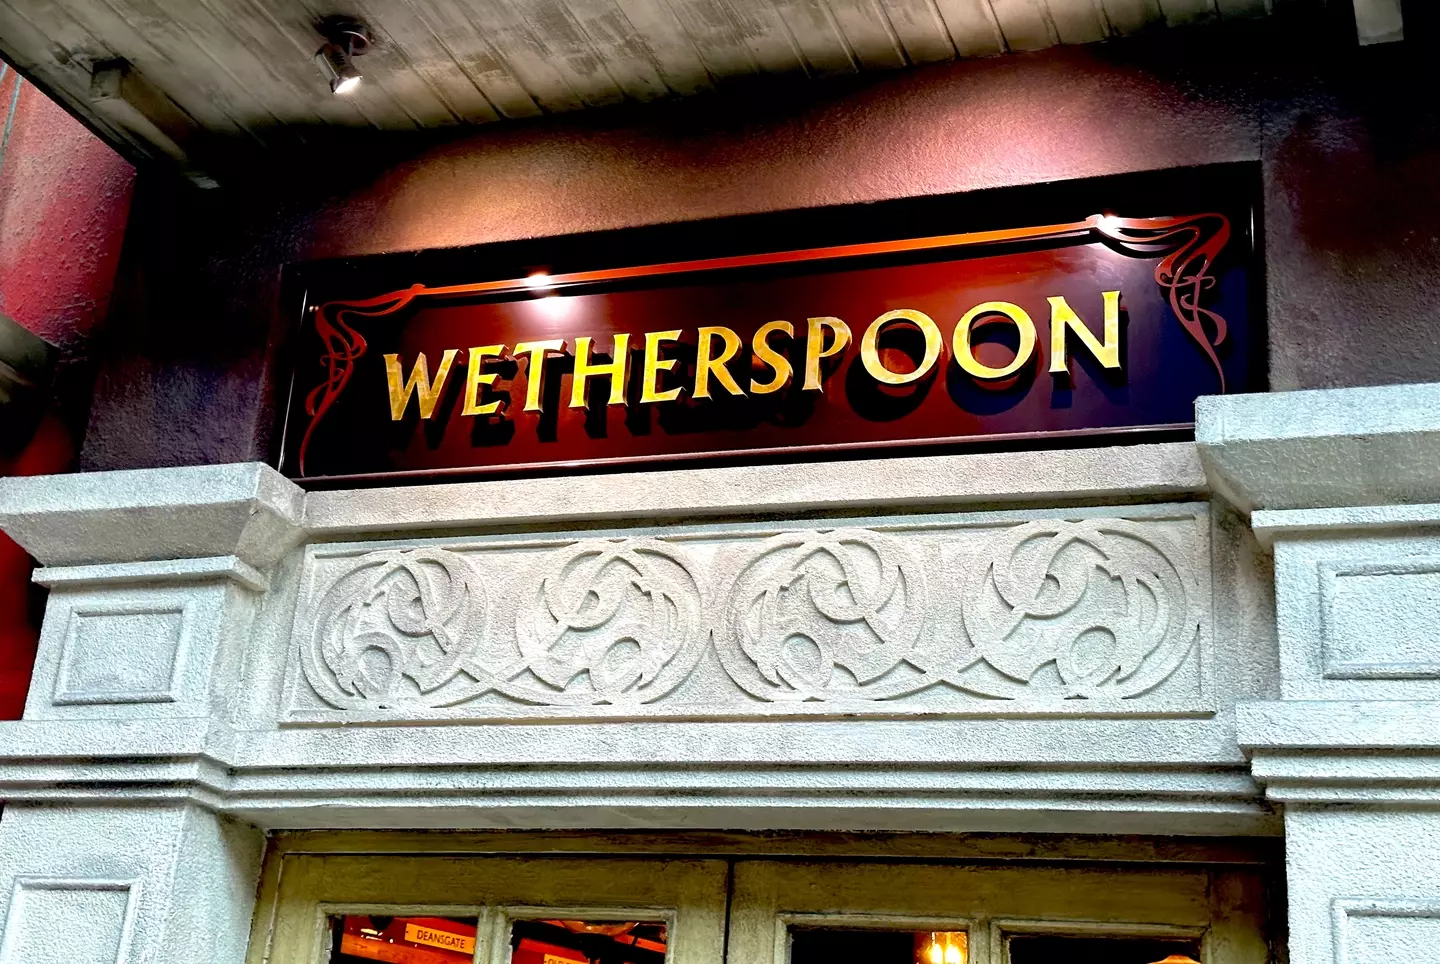 For the next couple of weeks prices will be low at Wetherspoons.